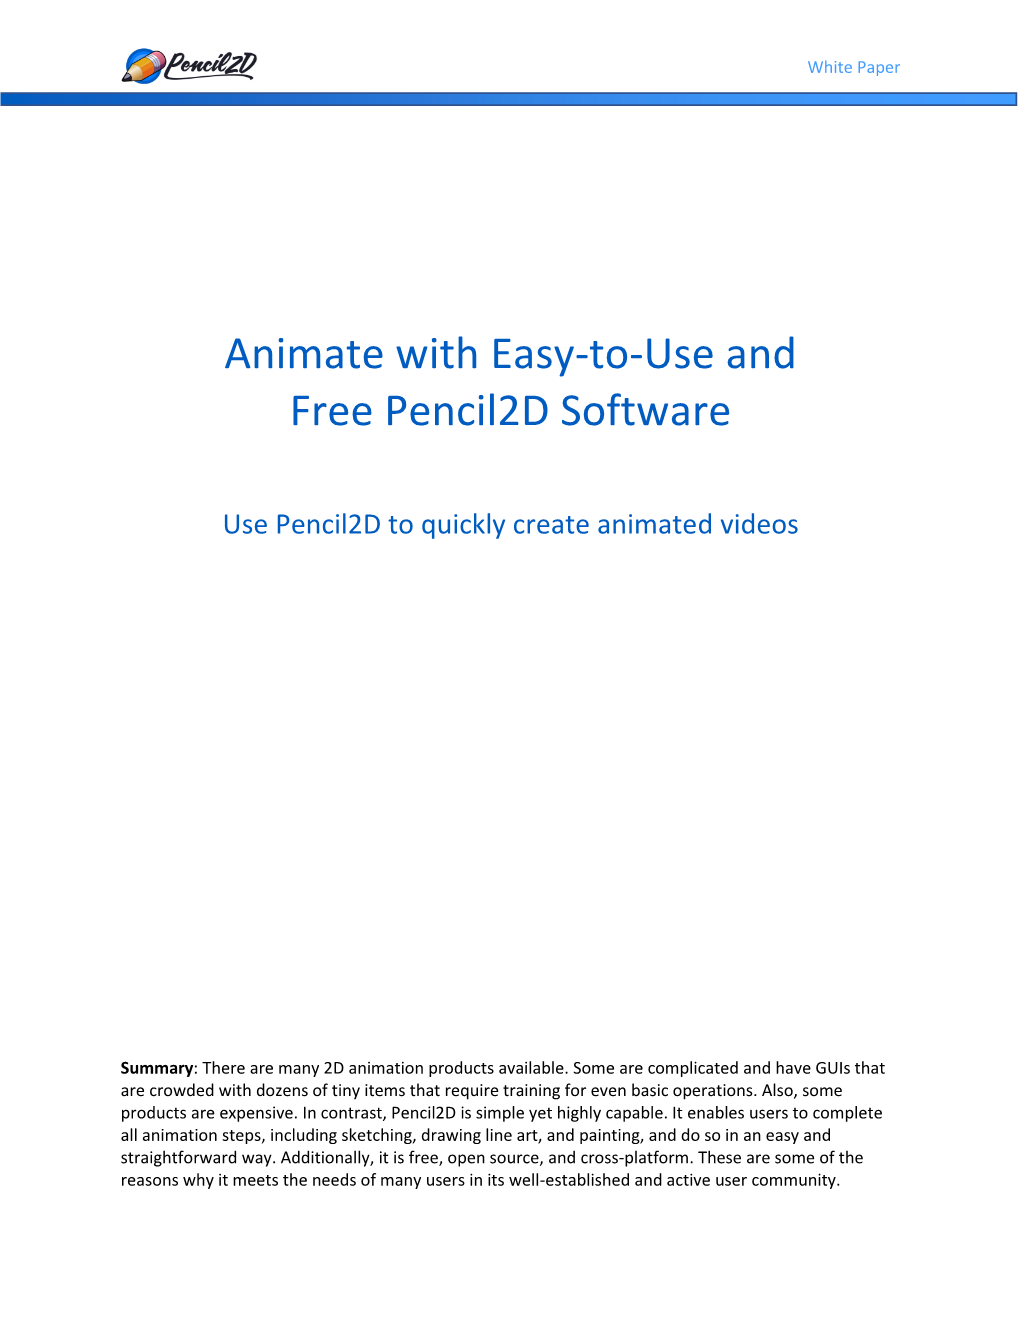 Animate with Easy-To-Use and Free Pencil2d Software